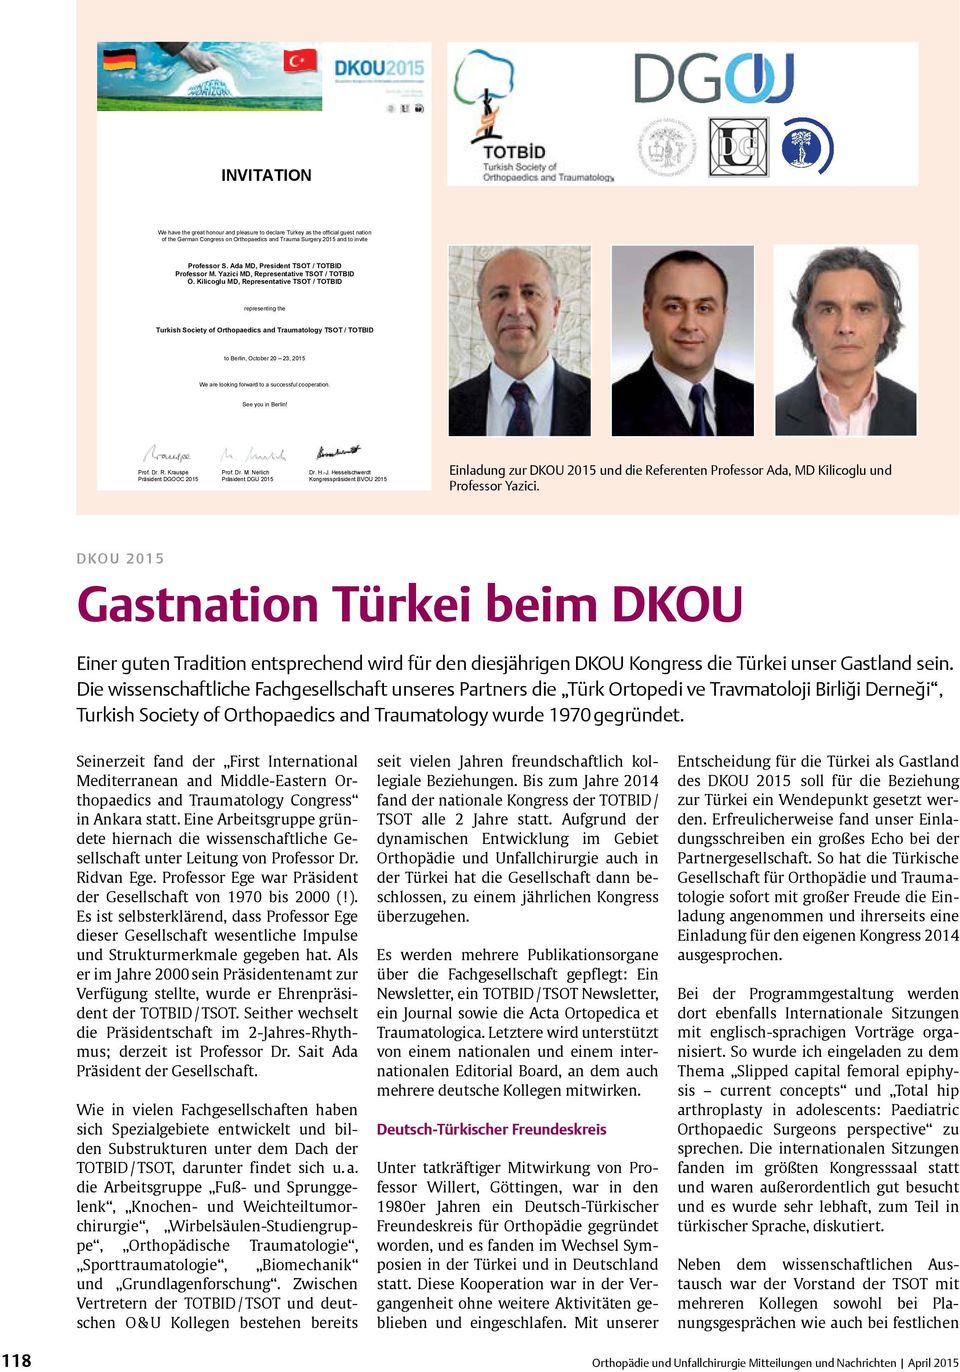 Kilicoglu MD, Representative TSOT / TOTBID representing the Turkish Society of Orthopaedics and Traumatology TSOT / TOTBID to Berlin, October 20 23, 2015 We are looking forward to a successful